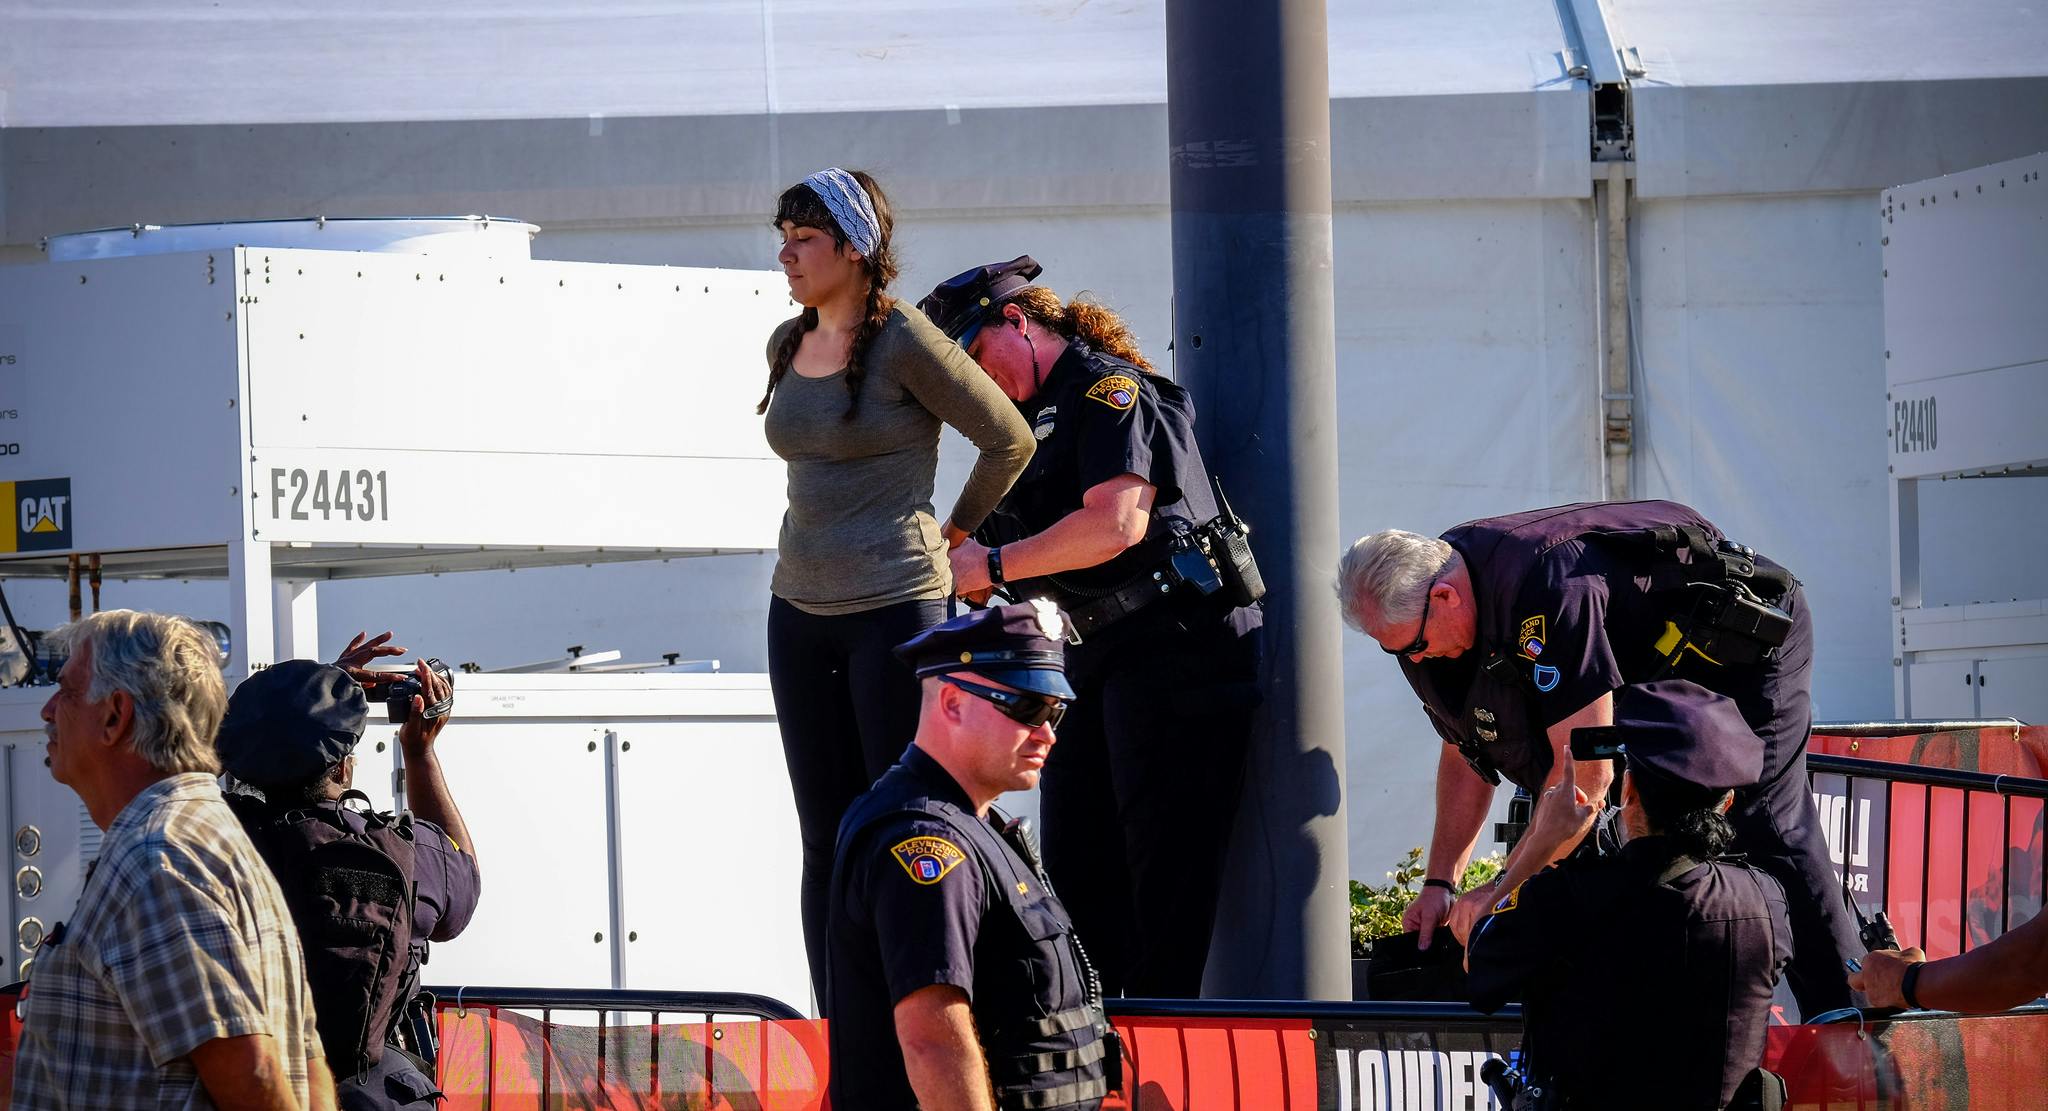 Activists arrested Tuesday during banner protest near the Republican National Convention.